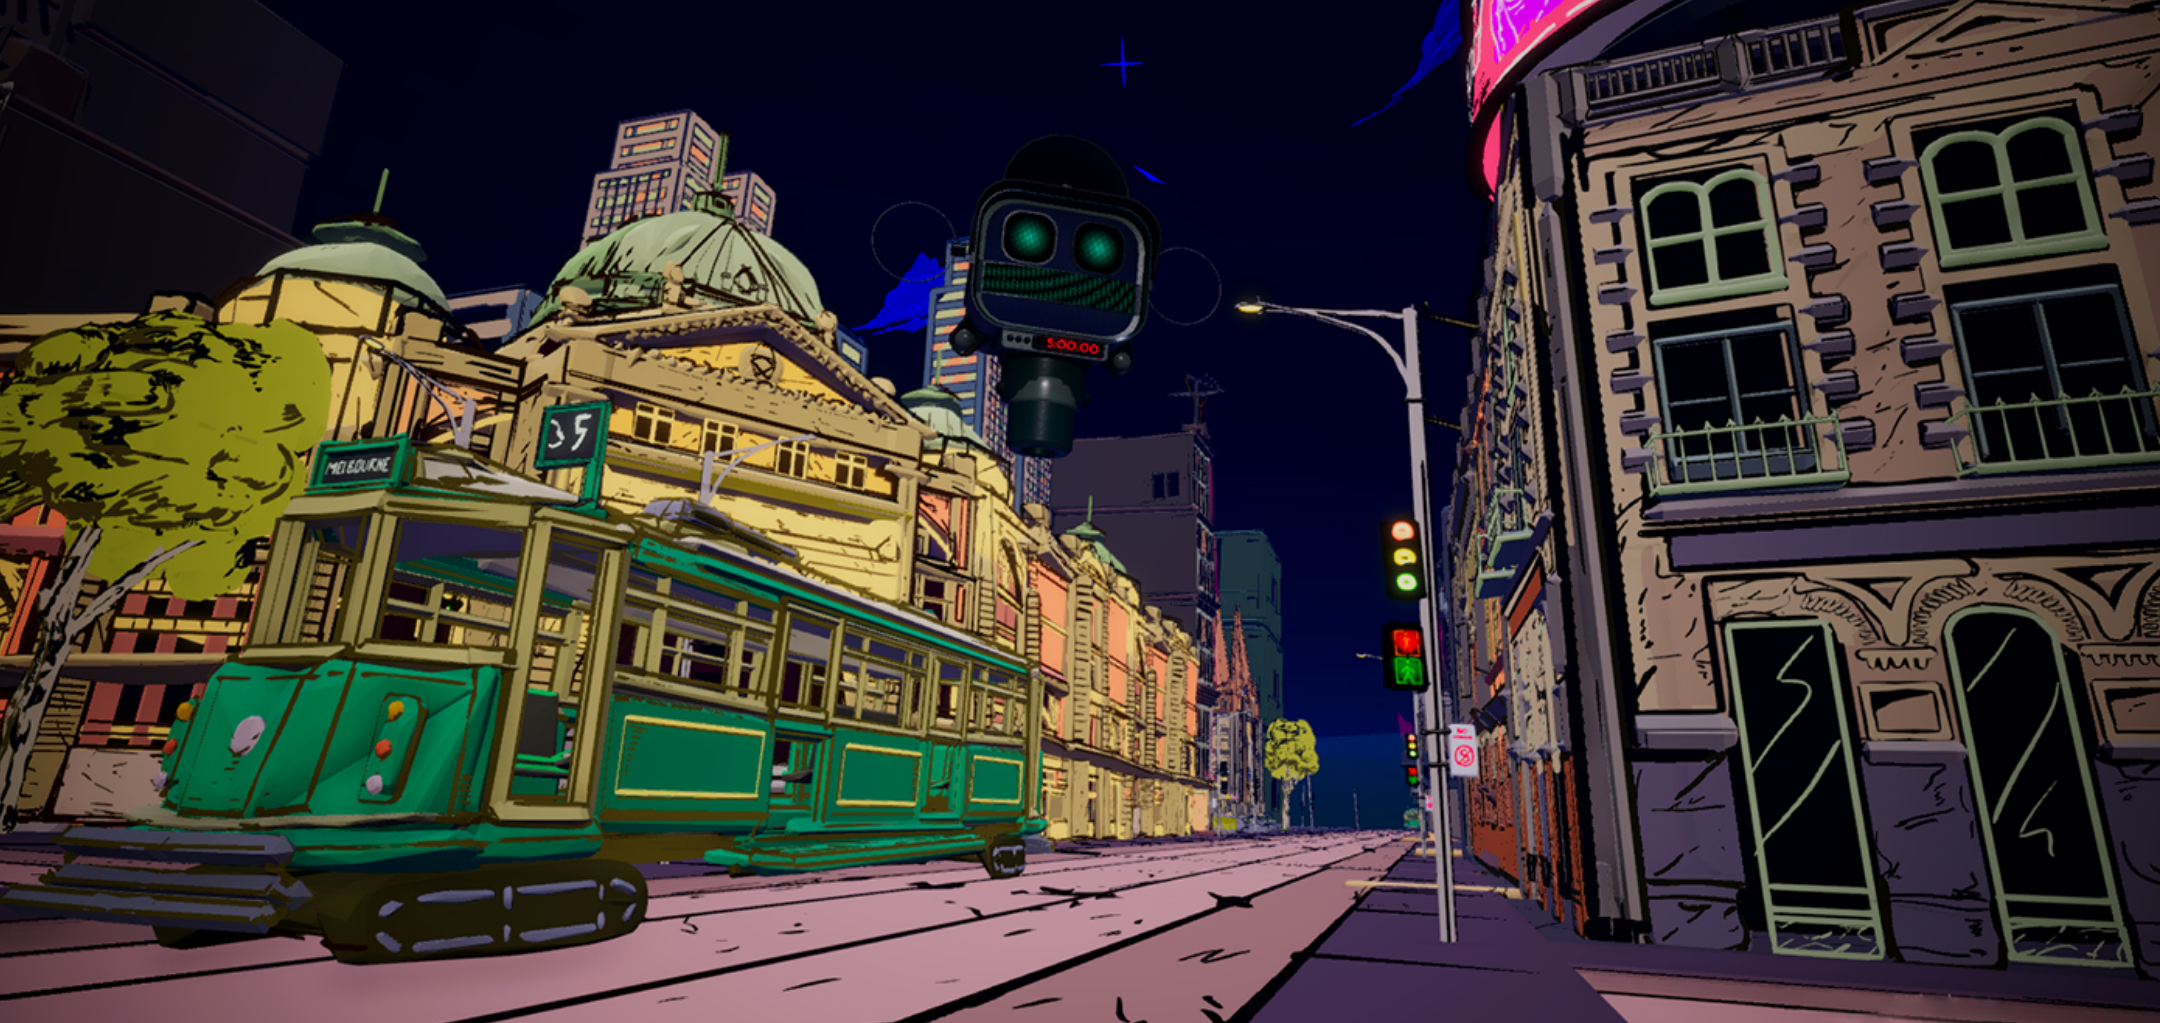 Animation from a Swinburne student film work depicting a Melbourne tram passing the iconic Flinders Street station